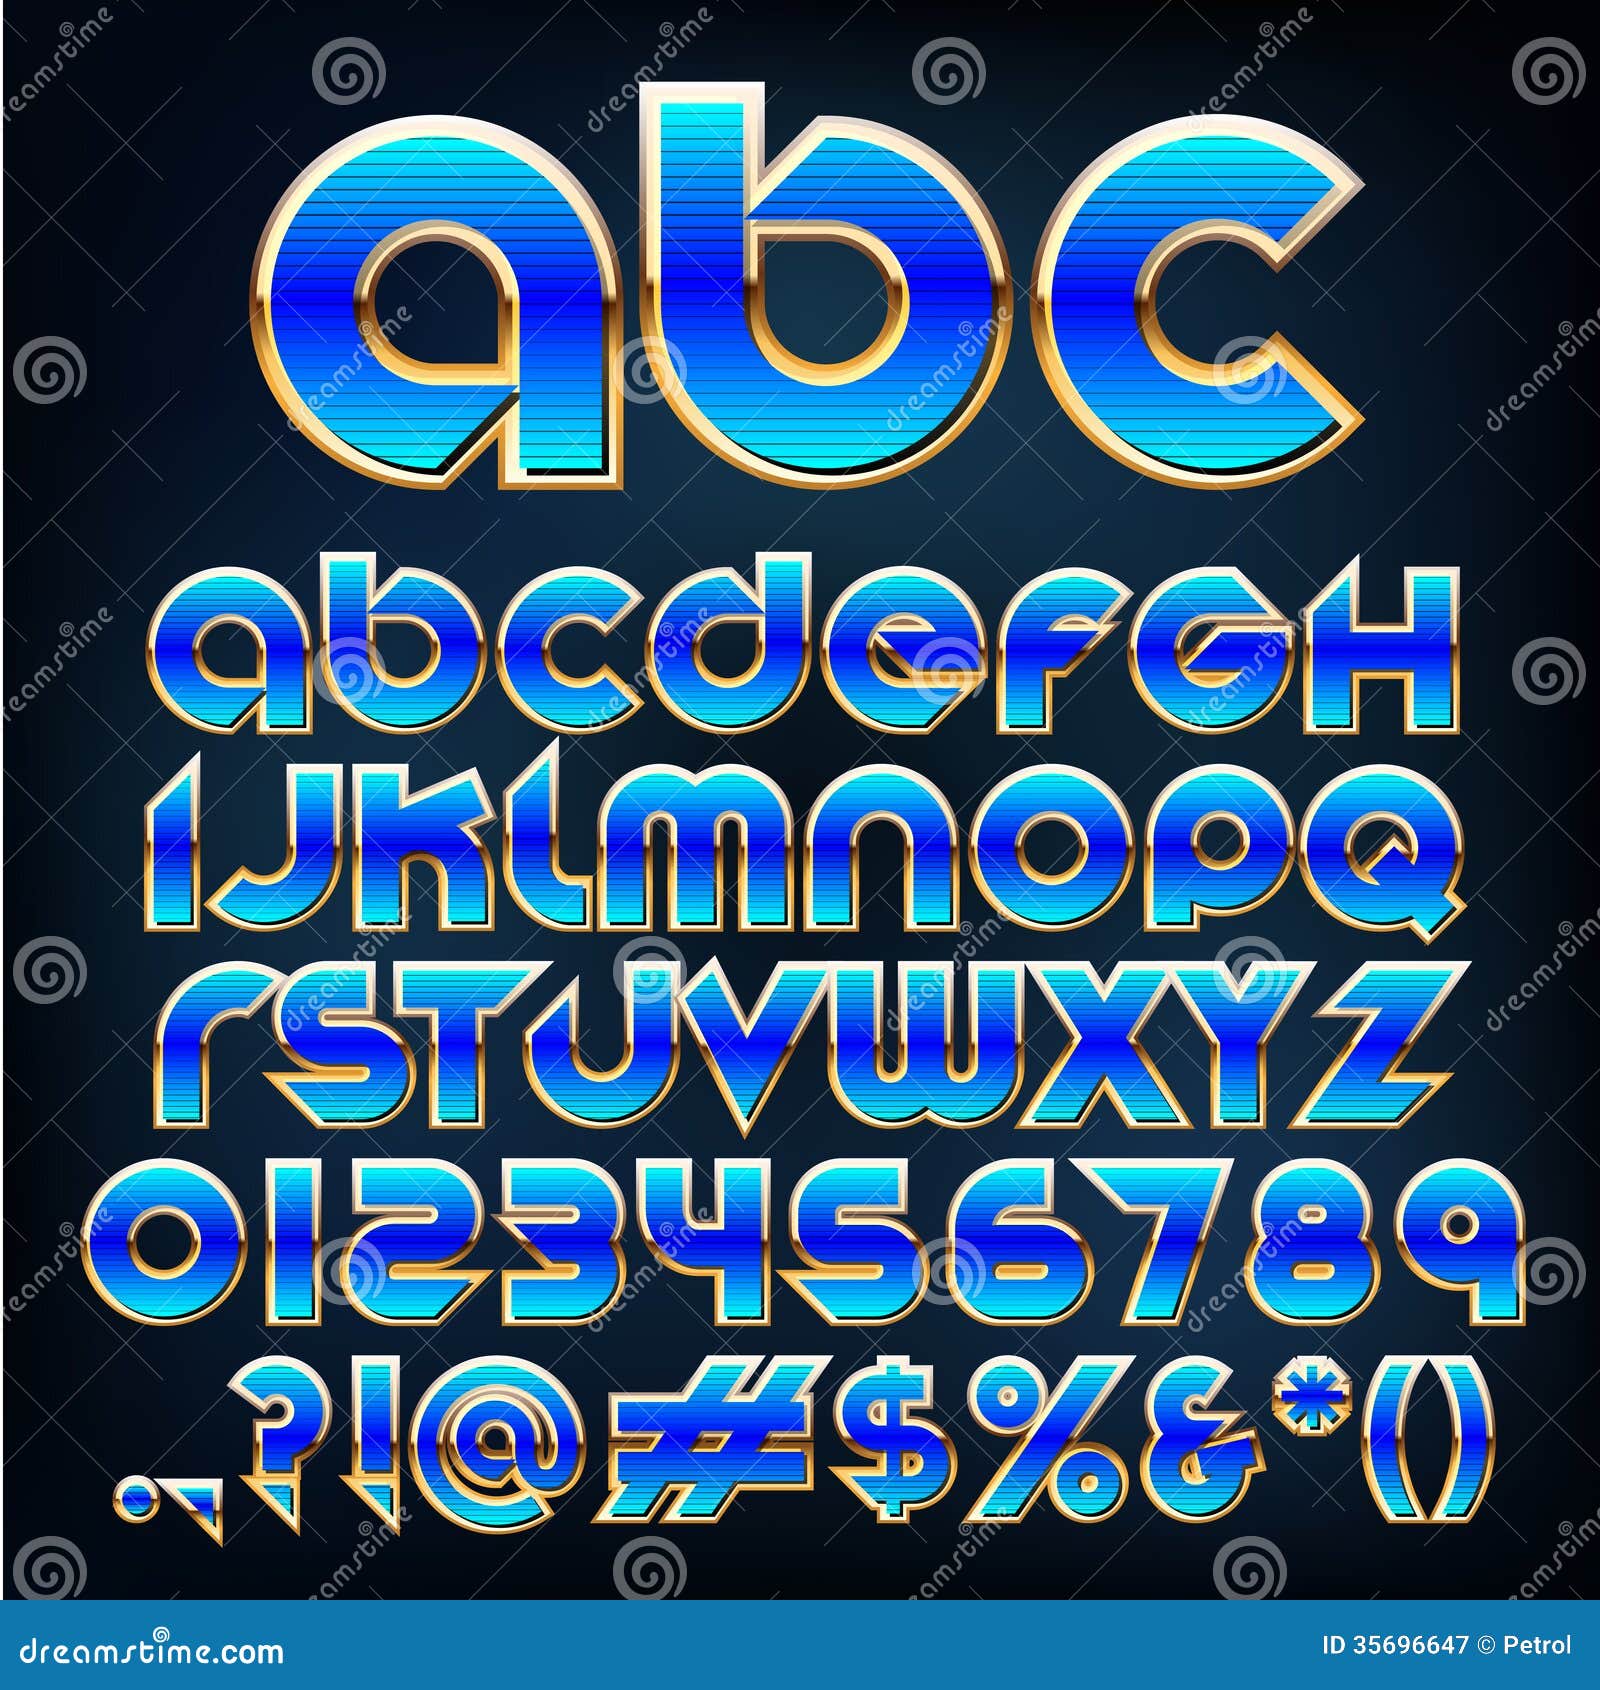 vector free download font - photo #31